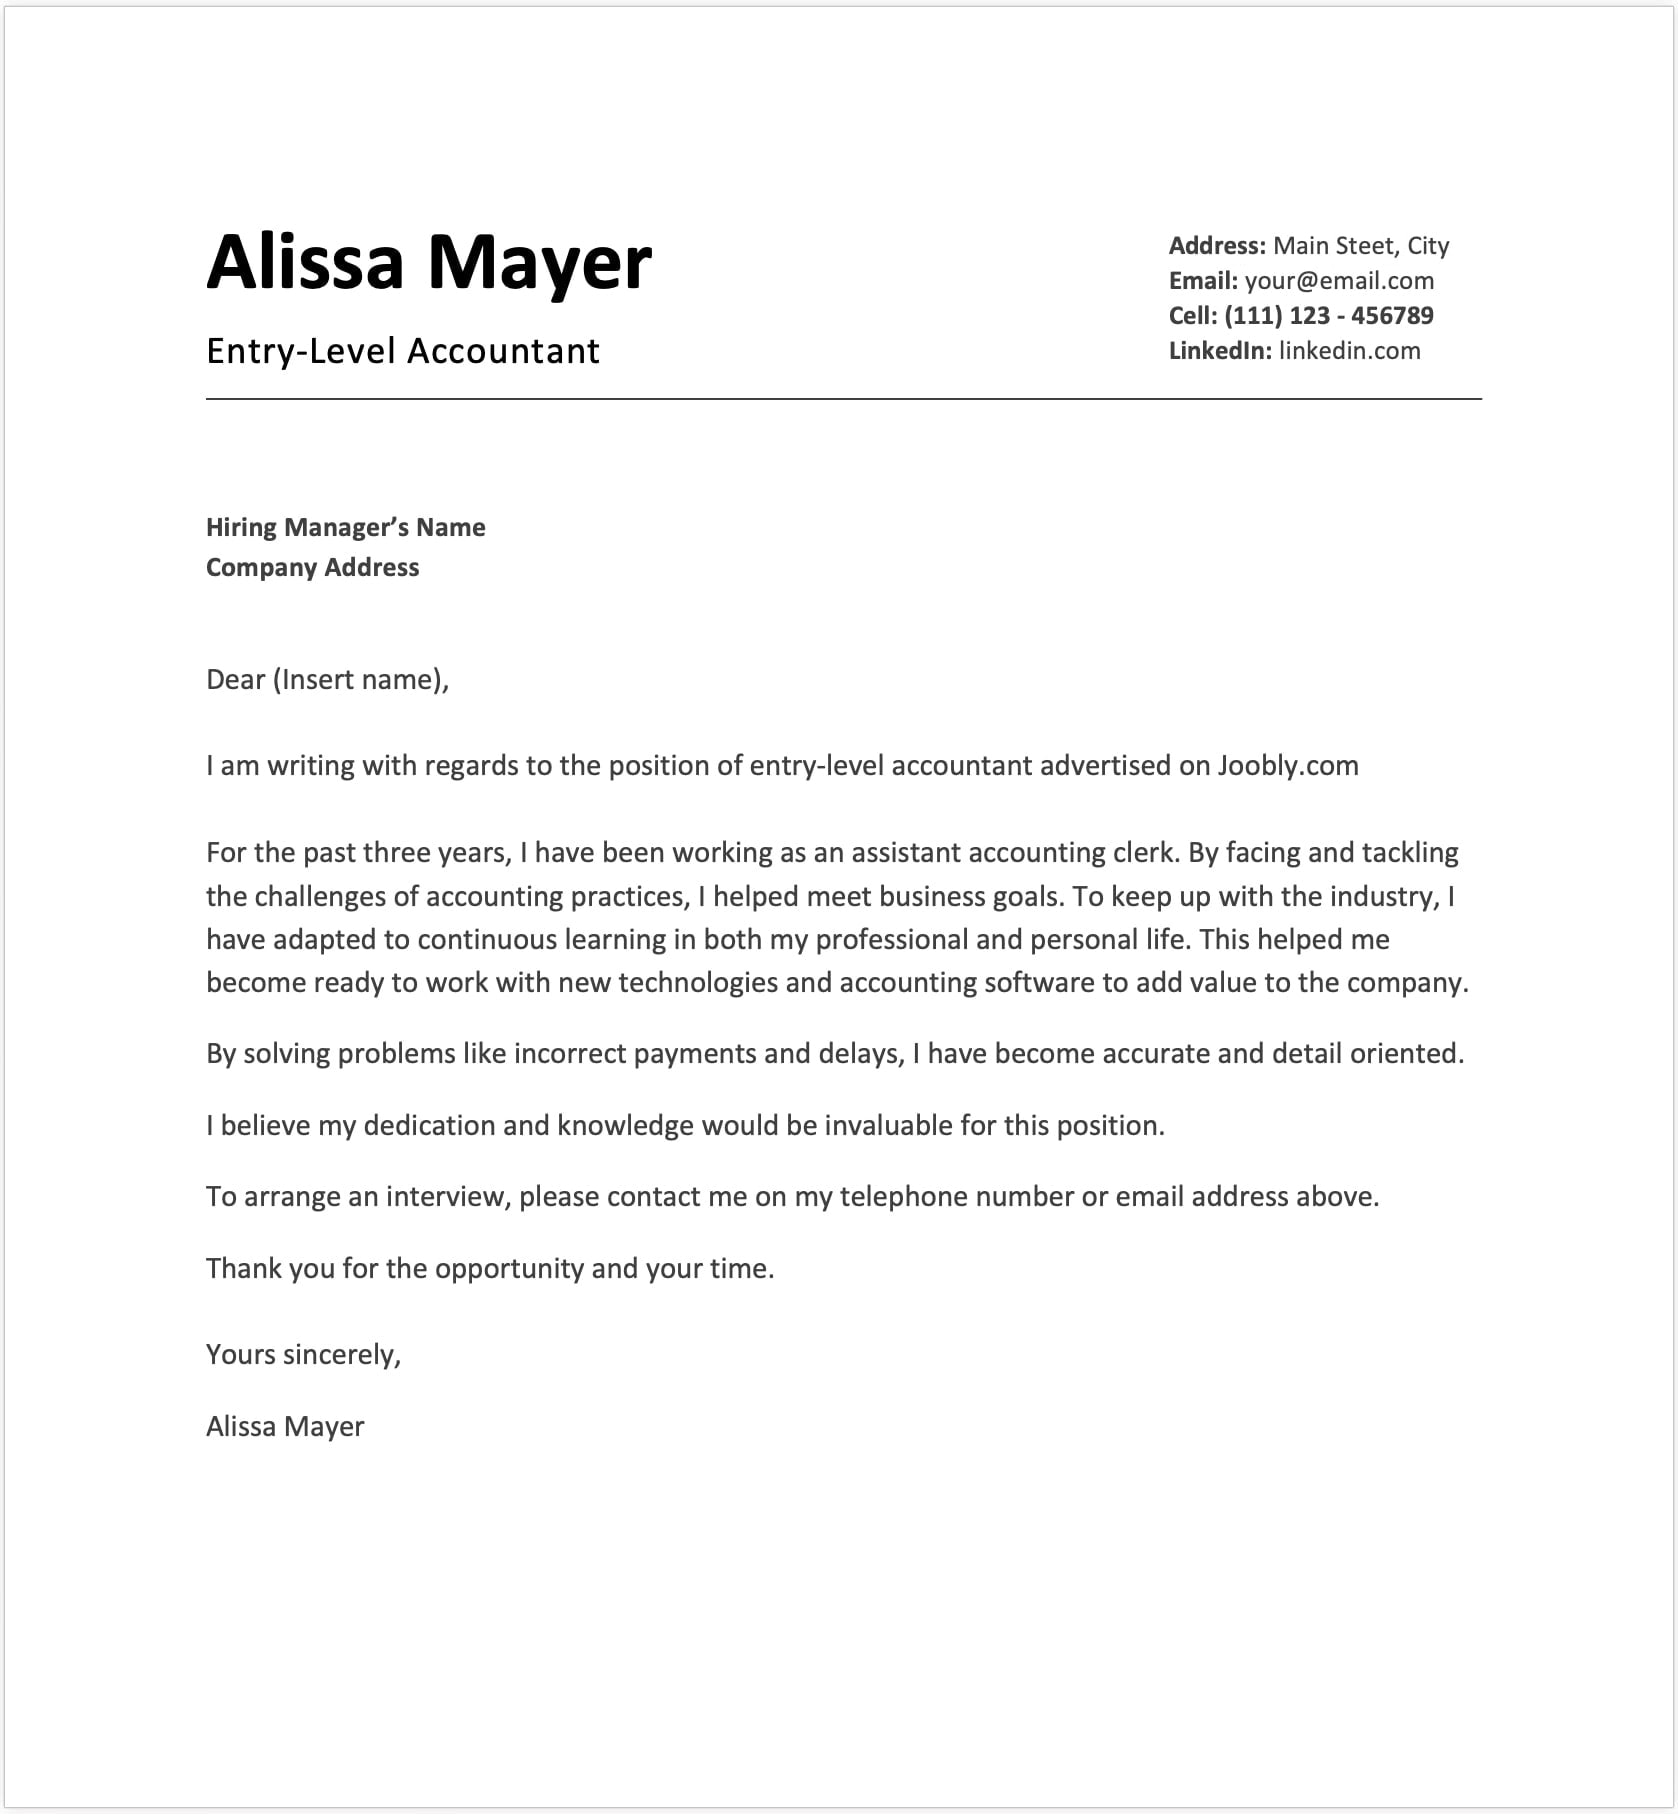 no relevant experience cover letter